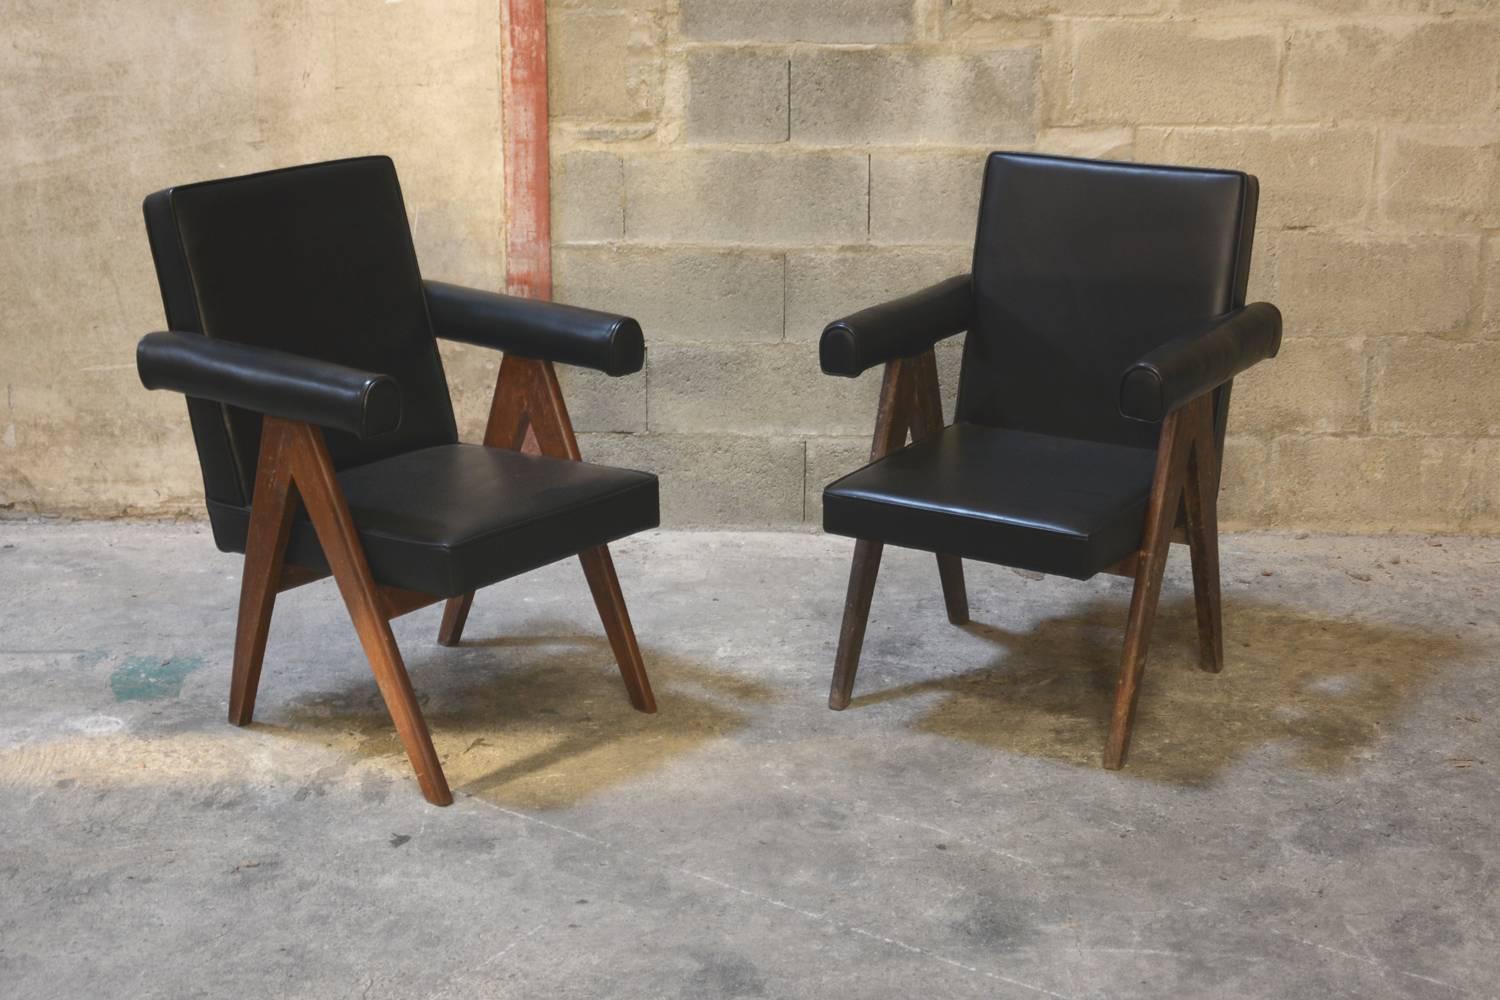 Pierre Jeanneret, set of two Senate Committee chairs from administrative buildings in Chandigarh, India. See photo before restoration when I bought them in Chandigarh,
These chairs are completely original, covered with new black leather. One of